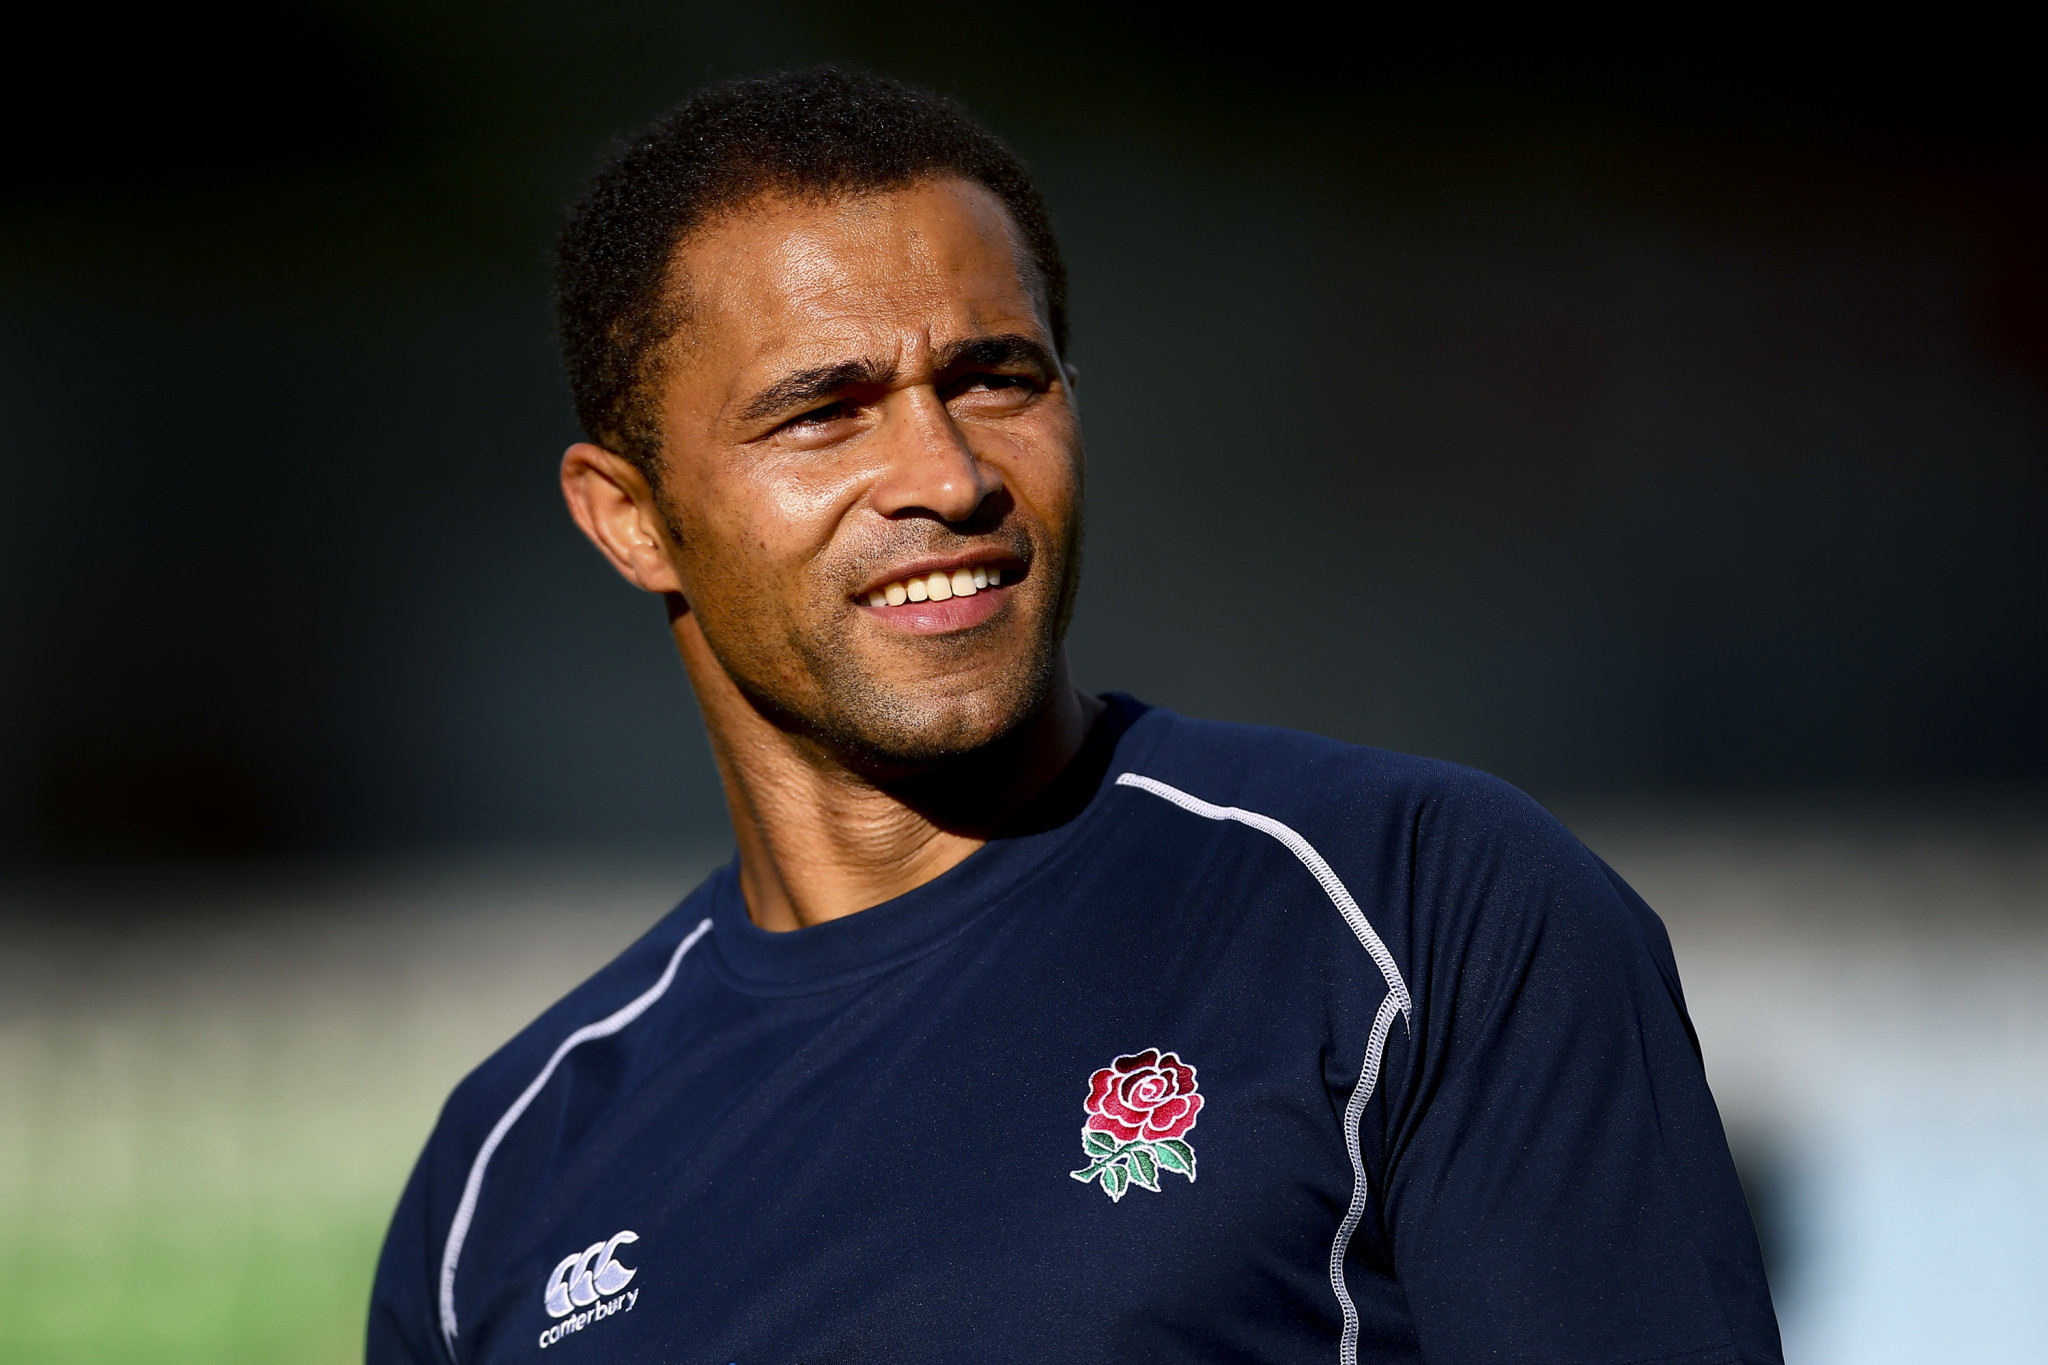 Jason Robinson spoke about the barriers that people in poverty have in accessing sport ©Getty Images